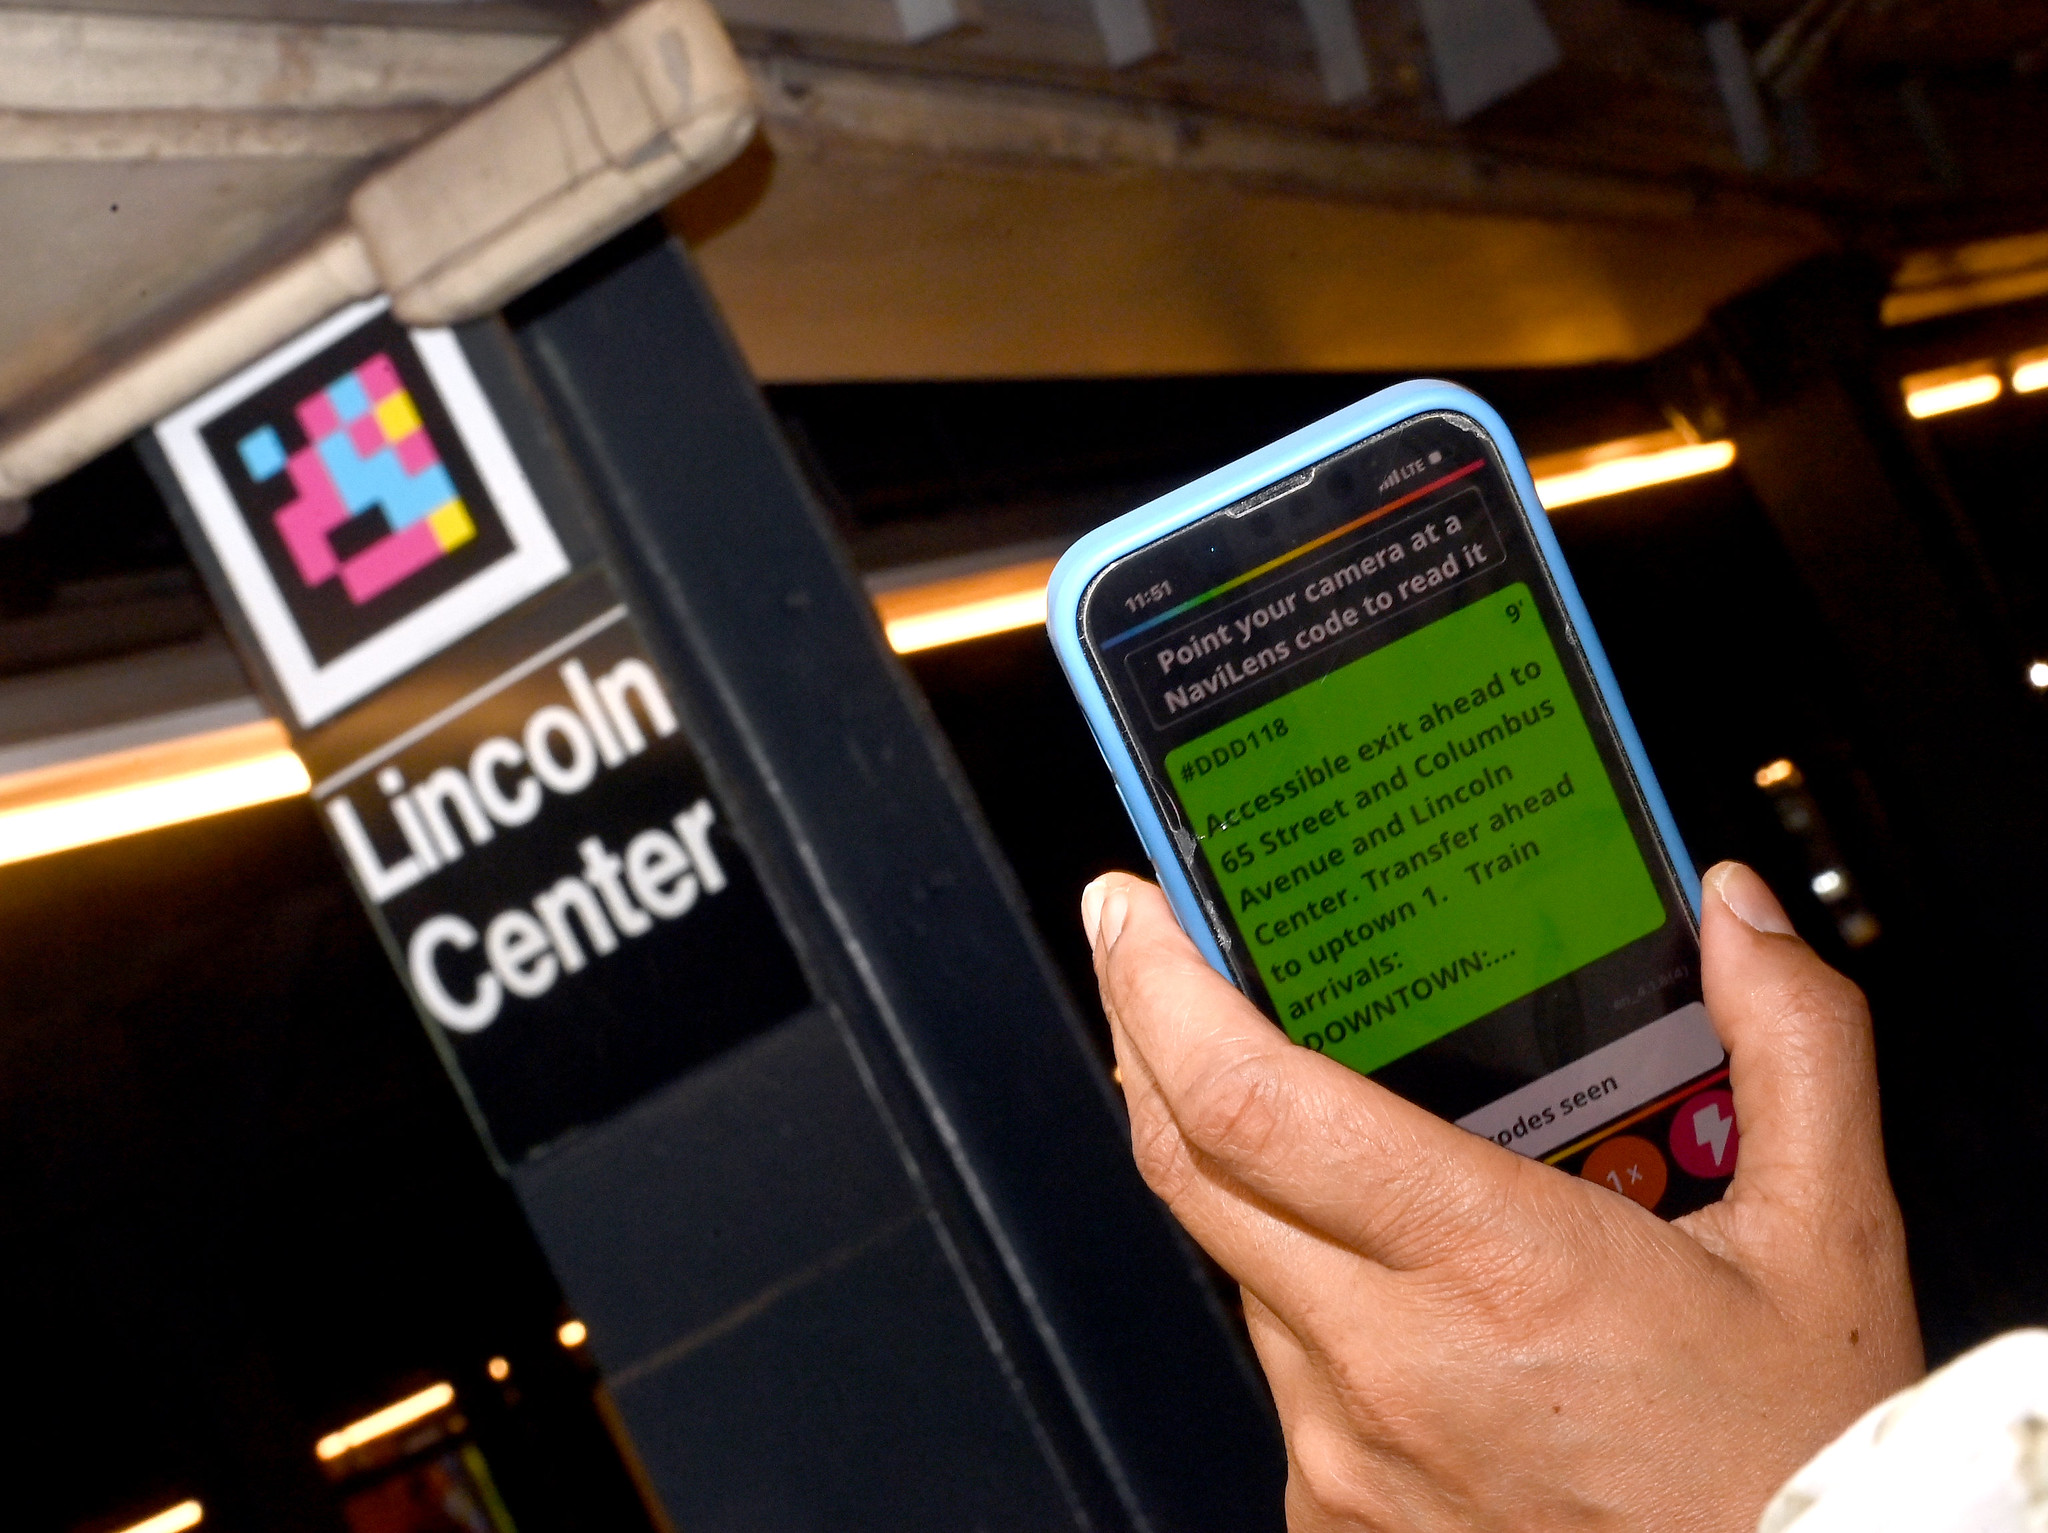 Phone in a hand pointed towards a NaviLens code in the background above a sign that says "Lincoln Center." The phone screen shows NaviLens information.